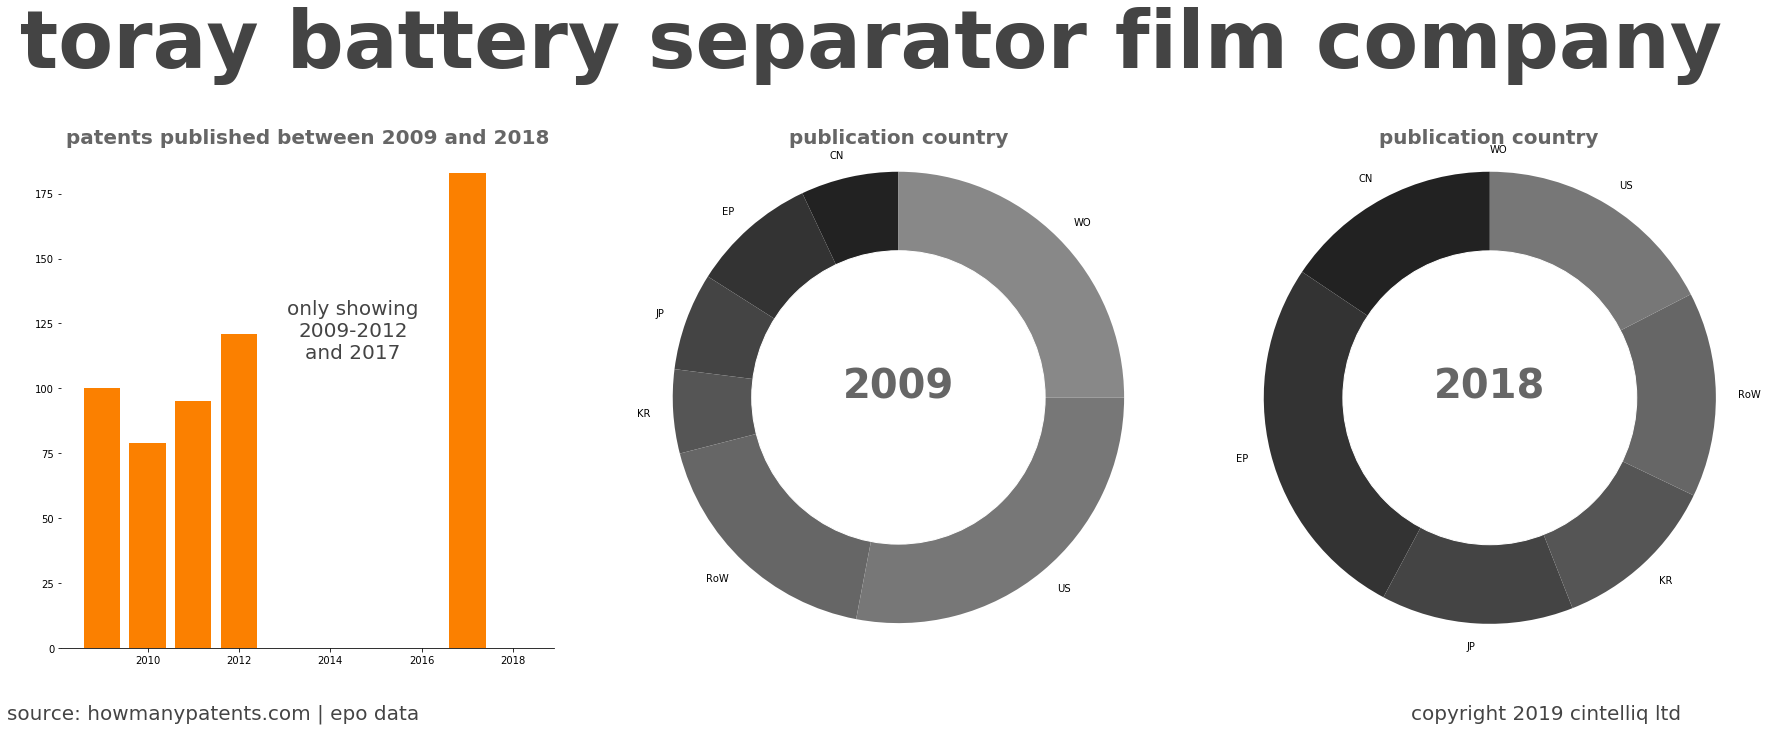 summary of patents for Toray Battery Separator Film Company